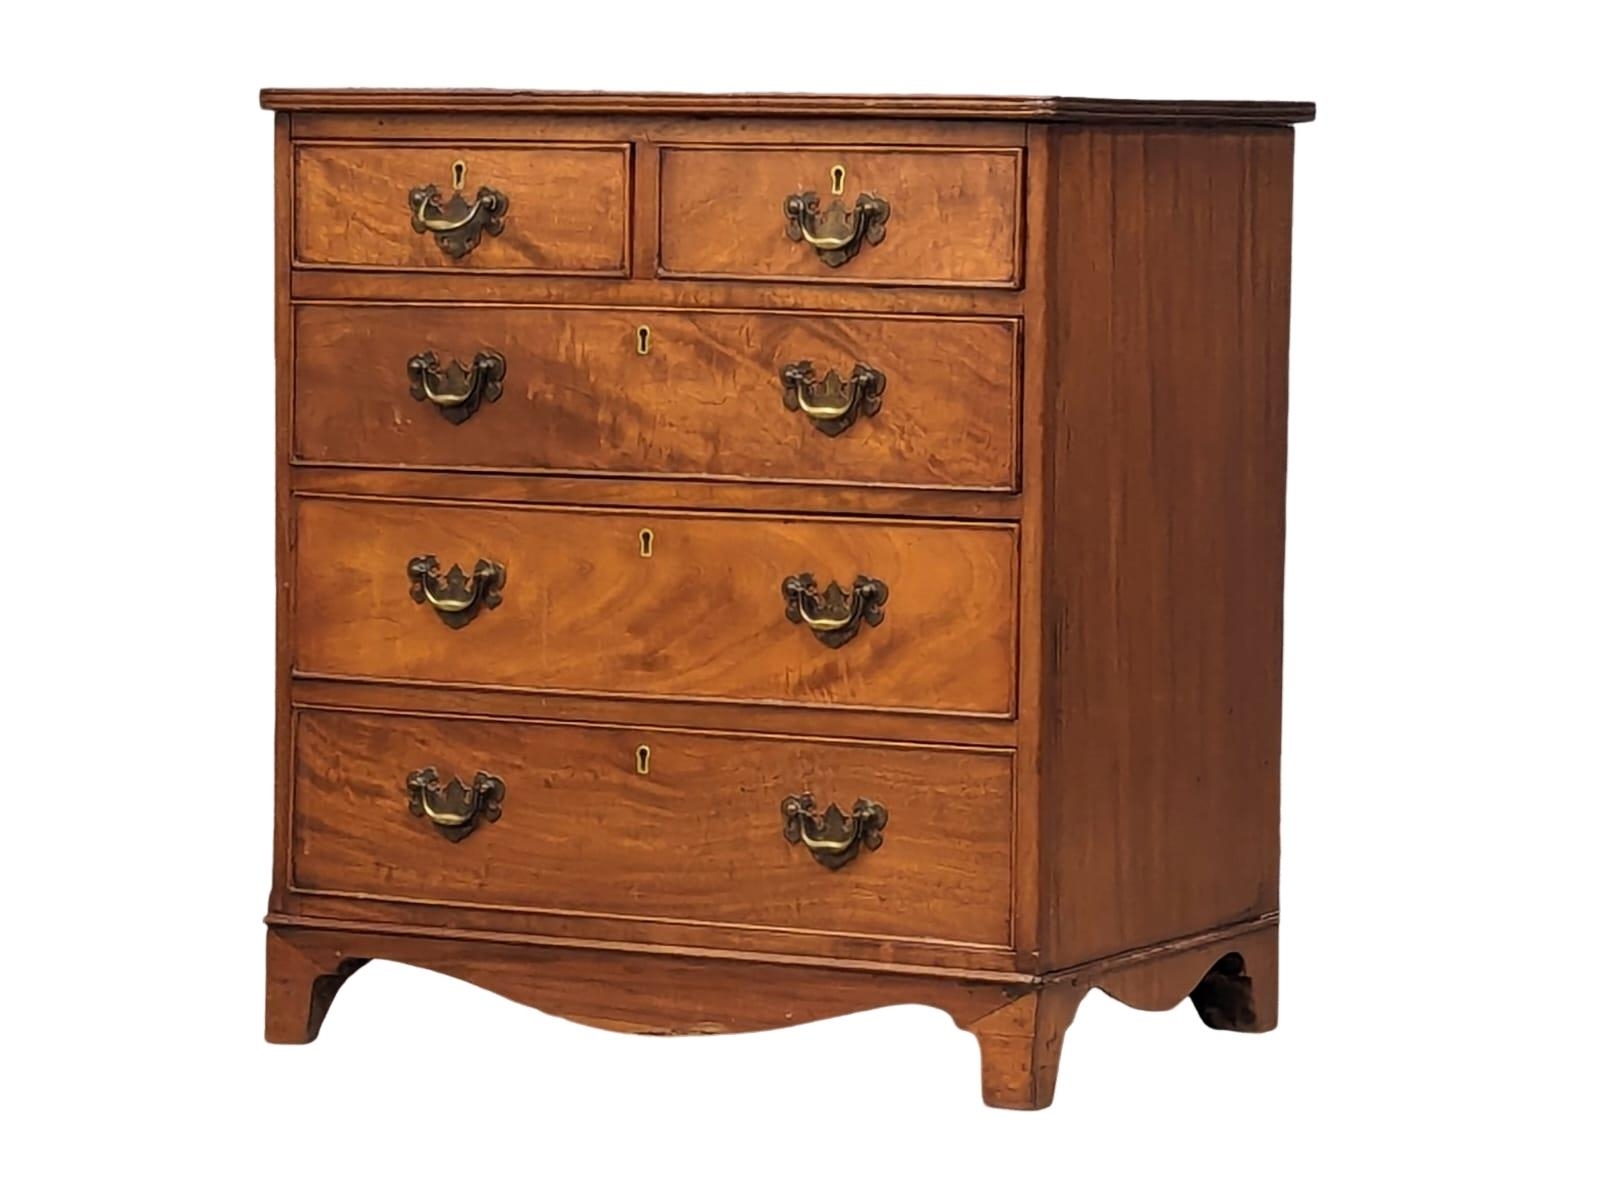 A small proportioned Georgian style mahogany chest of drawers, circa 1900. 63cm x 43cm x 68cm